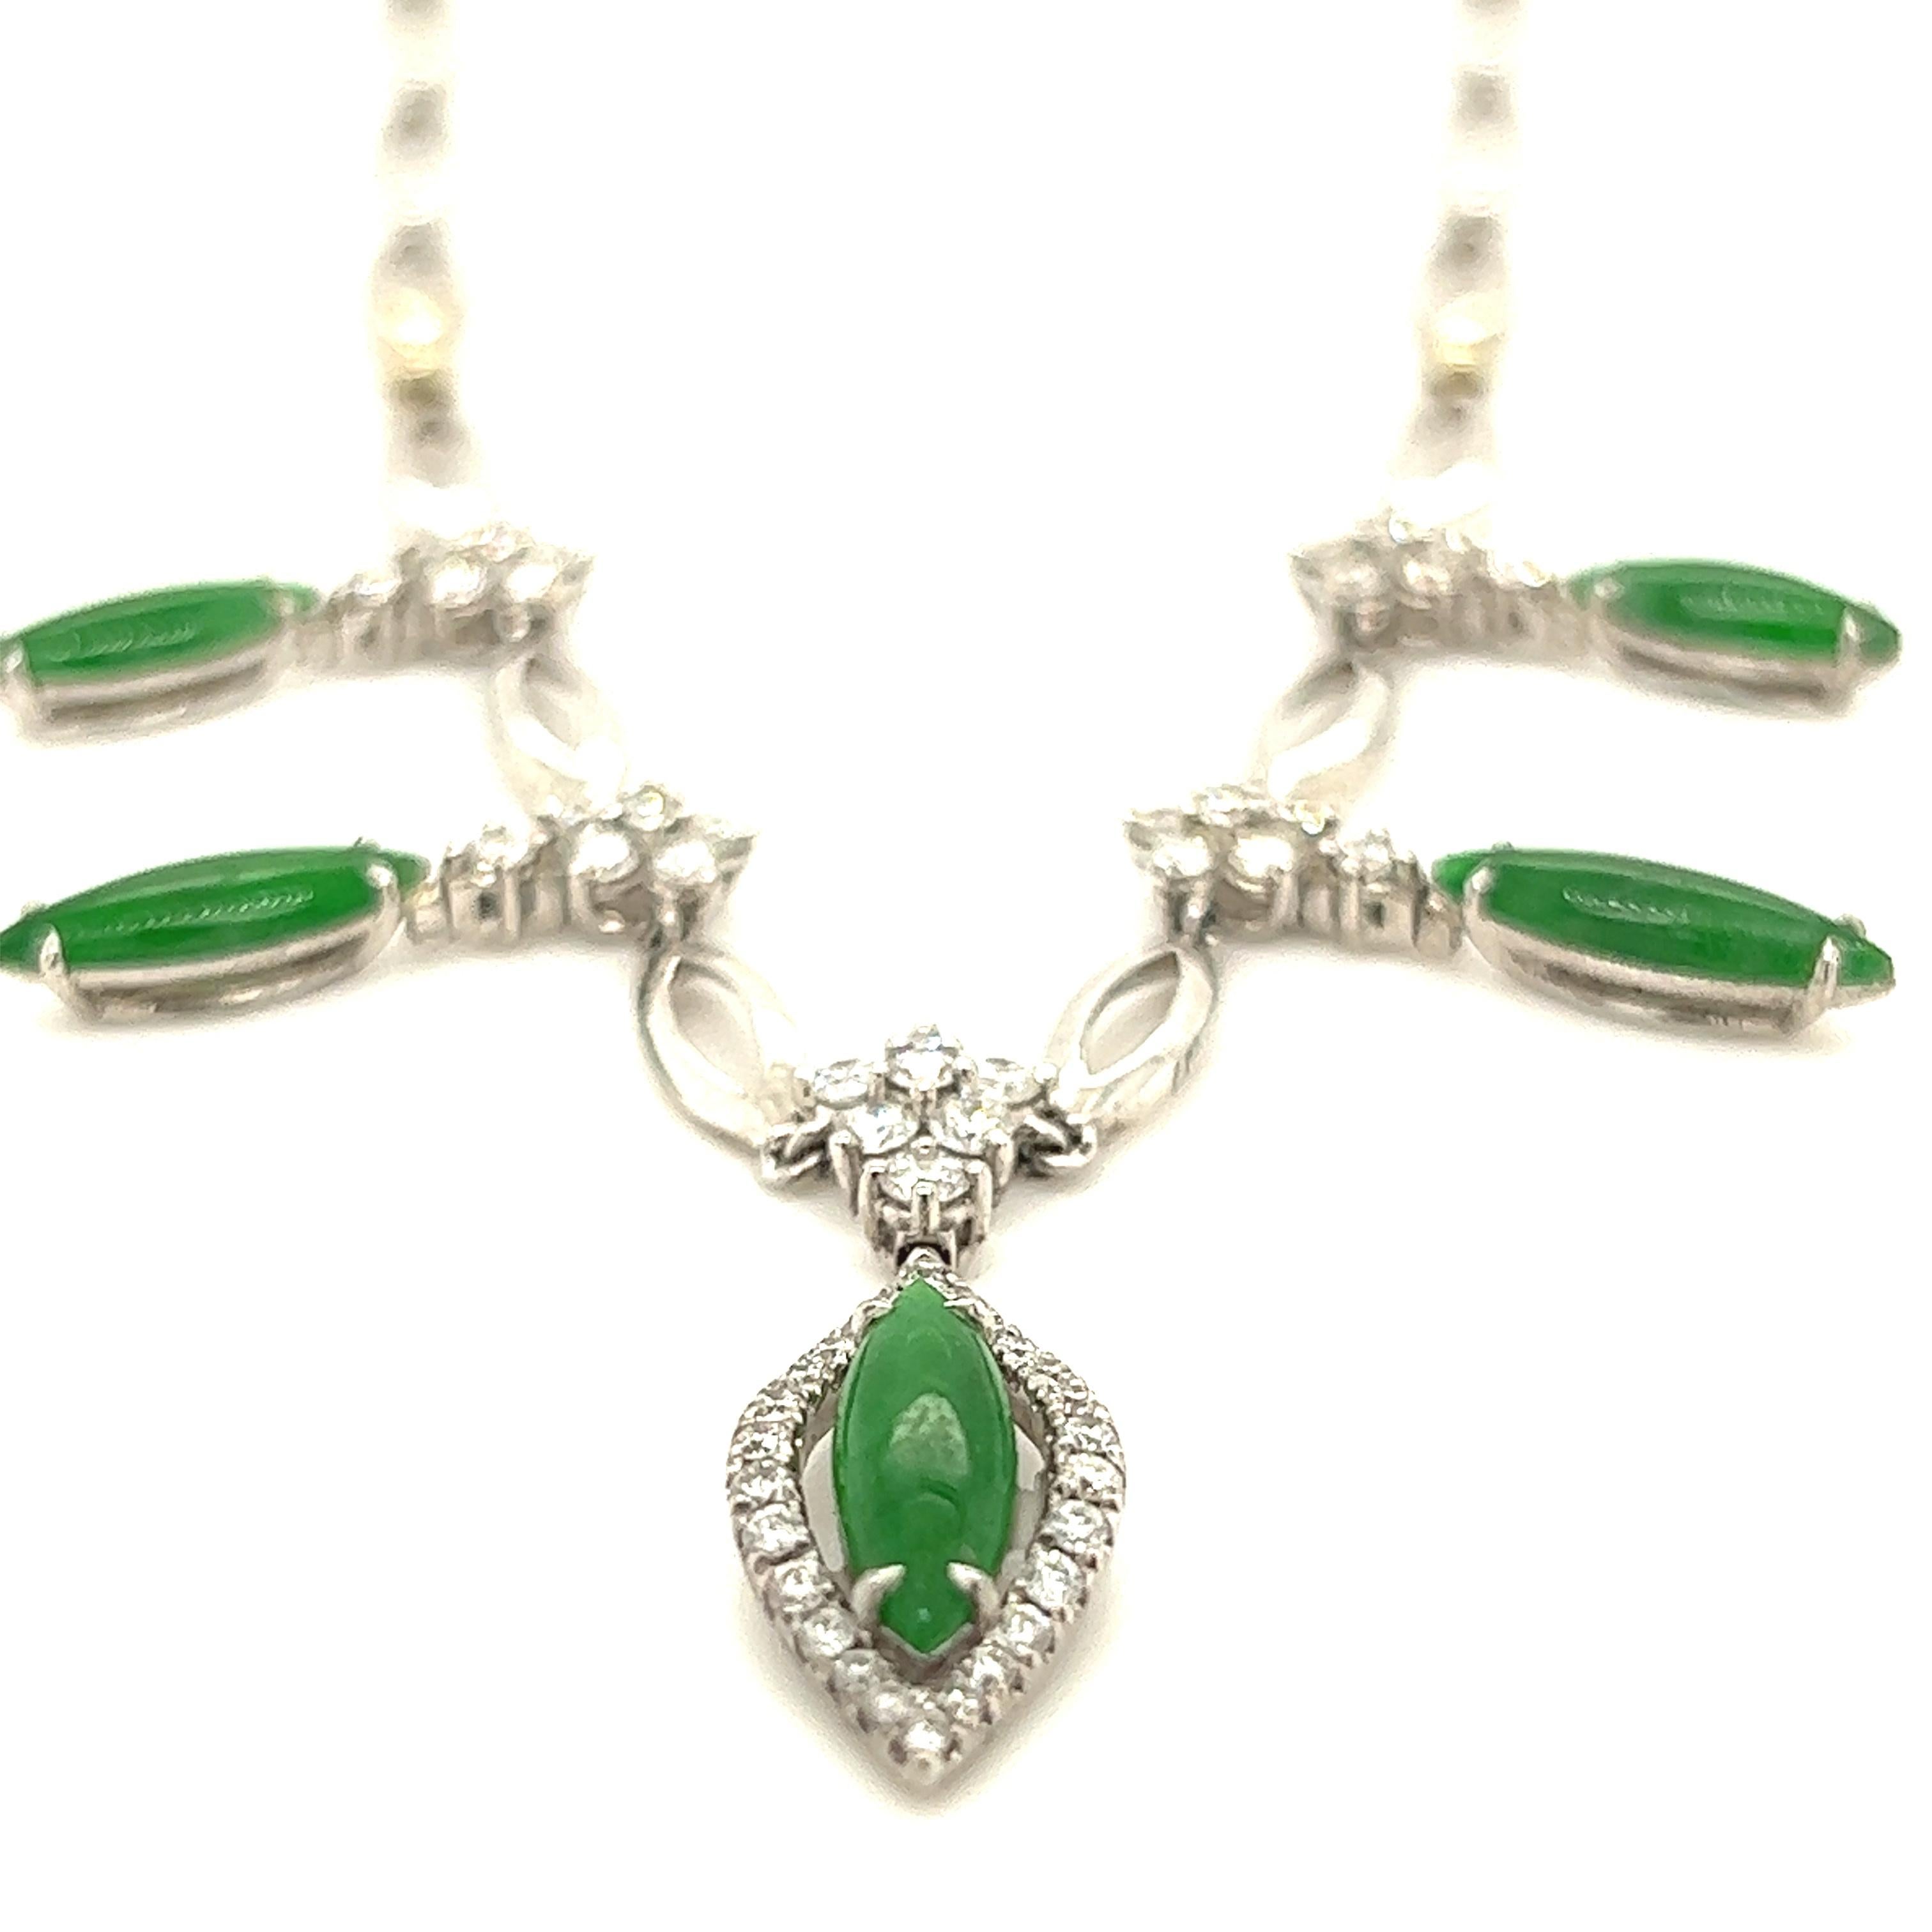 Beautiful Diamond and Jade Imperial necklace set in 18kt white gold. This necklace makes a statement on the neckline. Simple and elegant without over doing it. Excellent piece for that night out. 

Details:
5- 11.95mm x 3.77mm Marquise Jade
61-